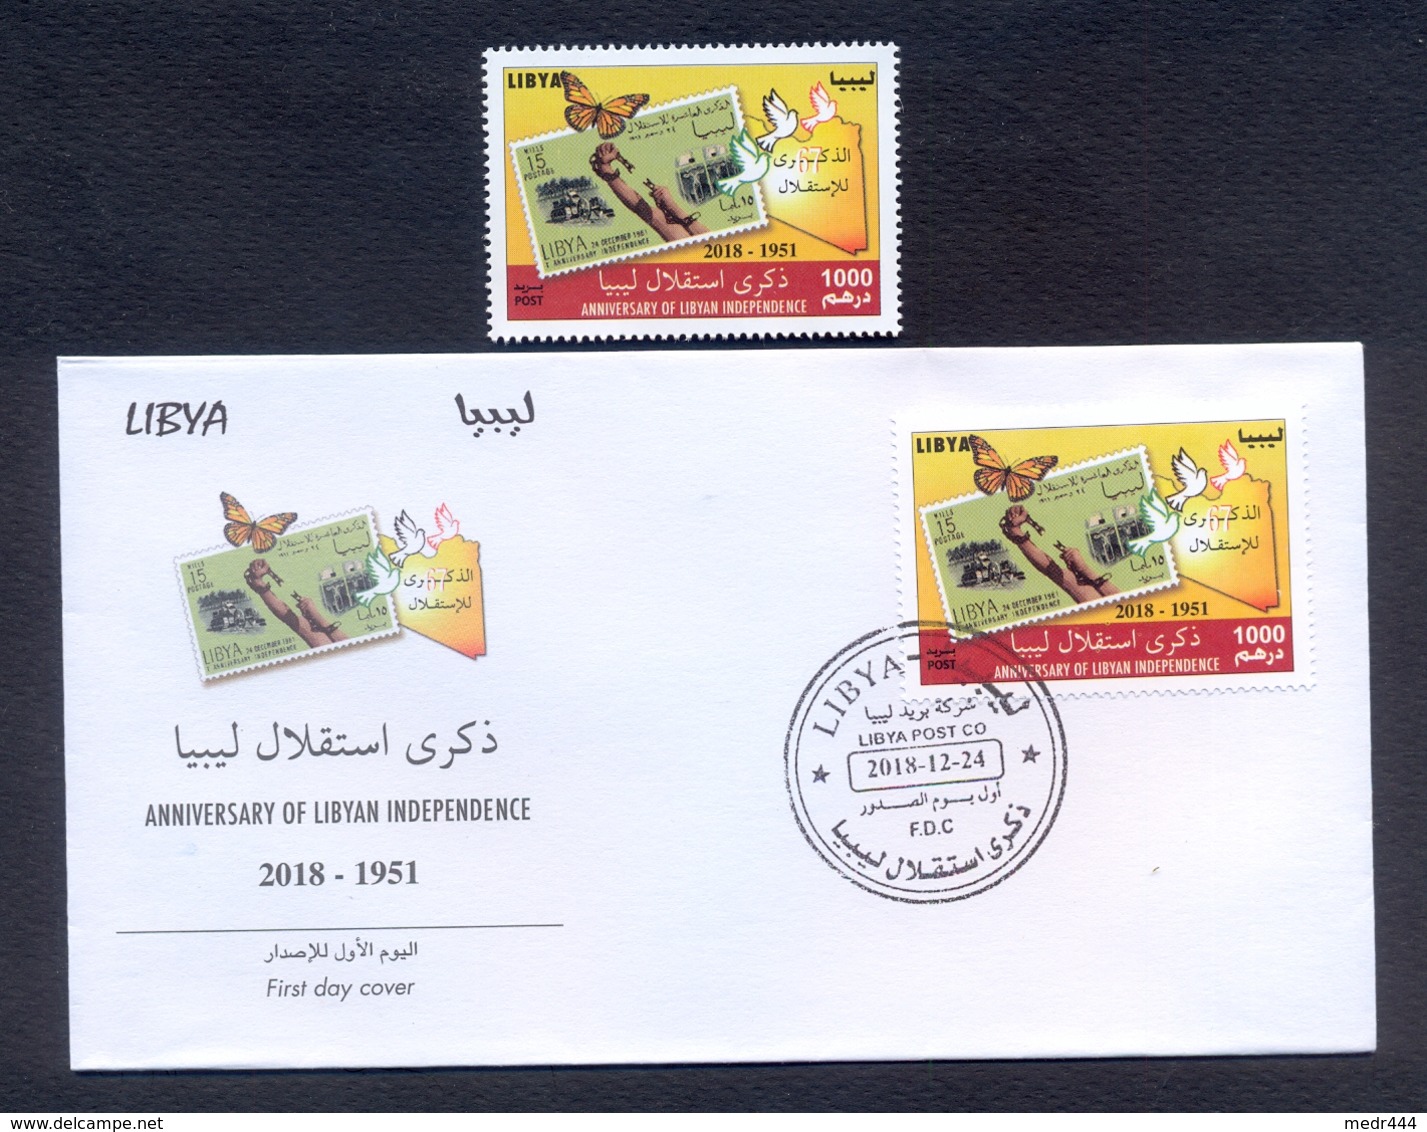 Libya 2018 - FDC + Stamp - Anniversary Of Libyan Independence -  MNH** Excellent Quality - Libia